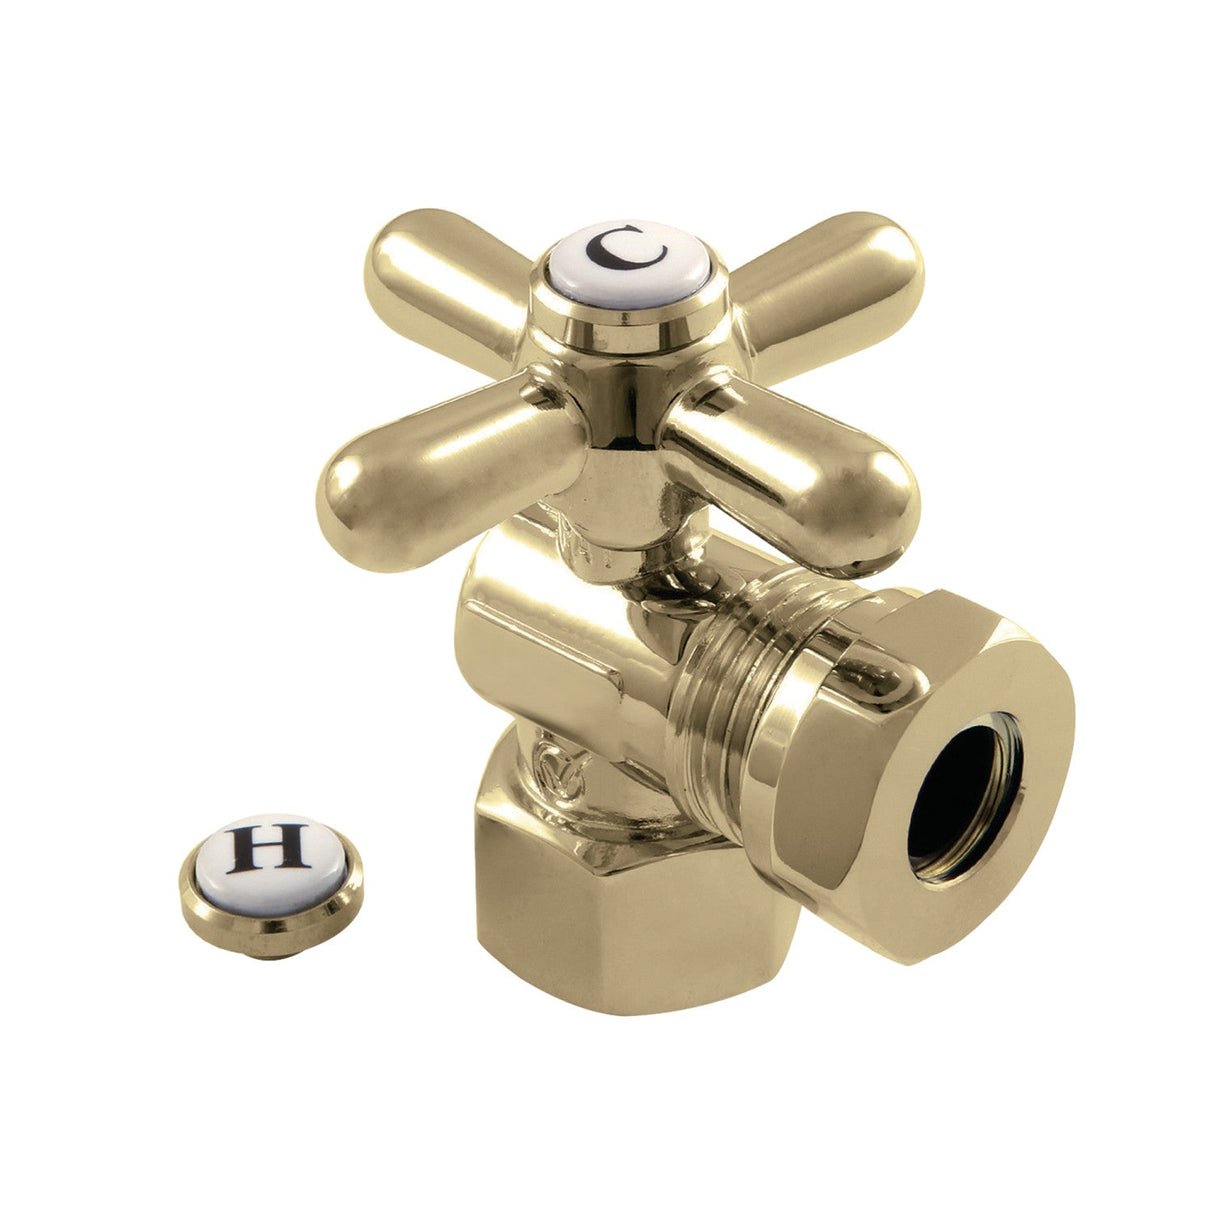 Vintage CC44102X 1/2-Inch FIP x 1/2 or 7/16-Inch Slip Joint Quarter-Turn Angle Stop Valve, Polished Brass